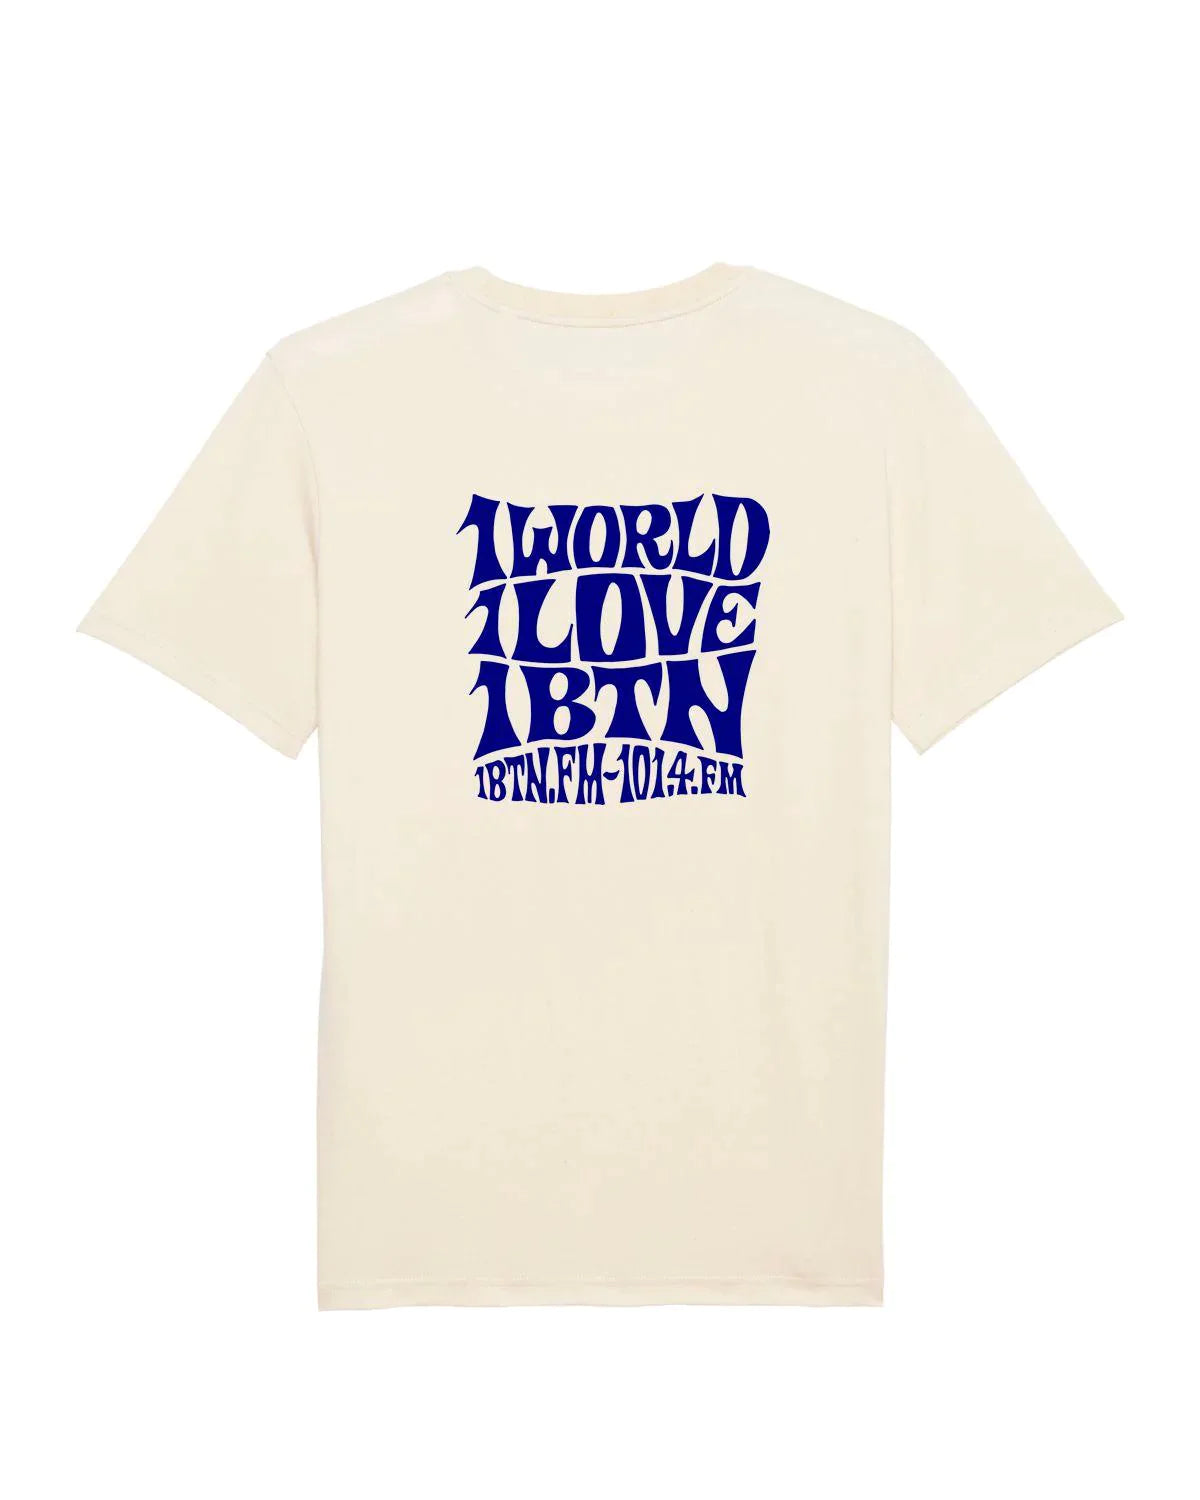 1 WORLD 1 LOVE by Swifty: 2 Sided T-Shirt Official Merchandise of 1BTN.FM (5 Colour Options) - SOUND IS COLOUR